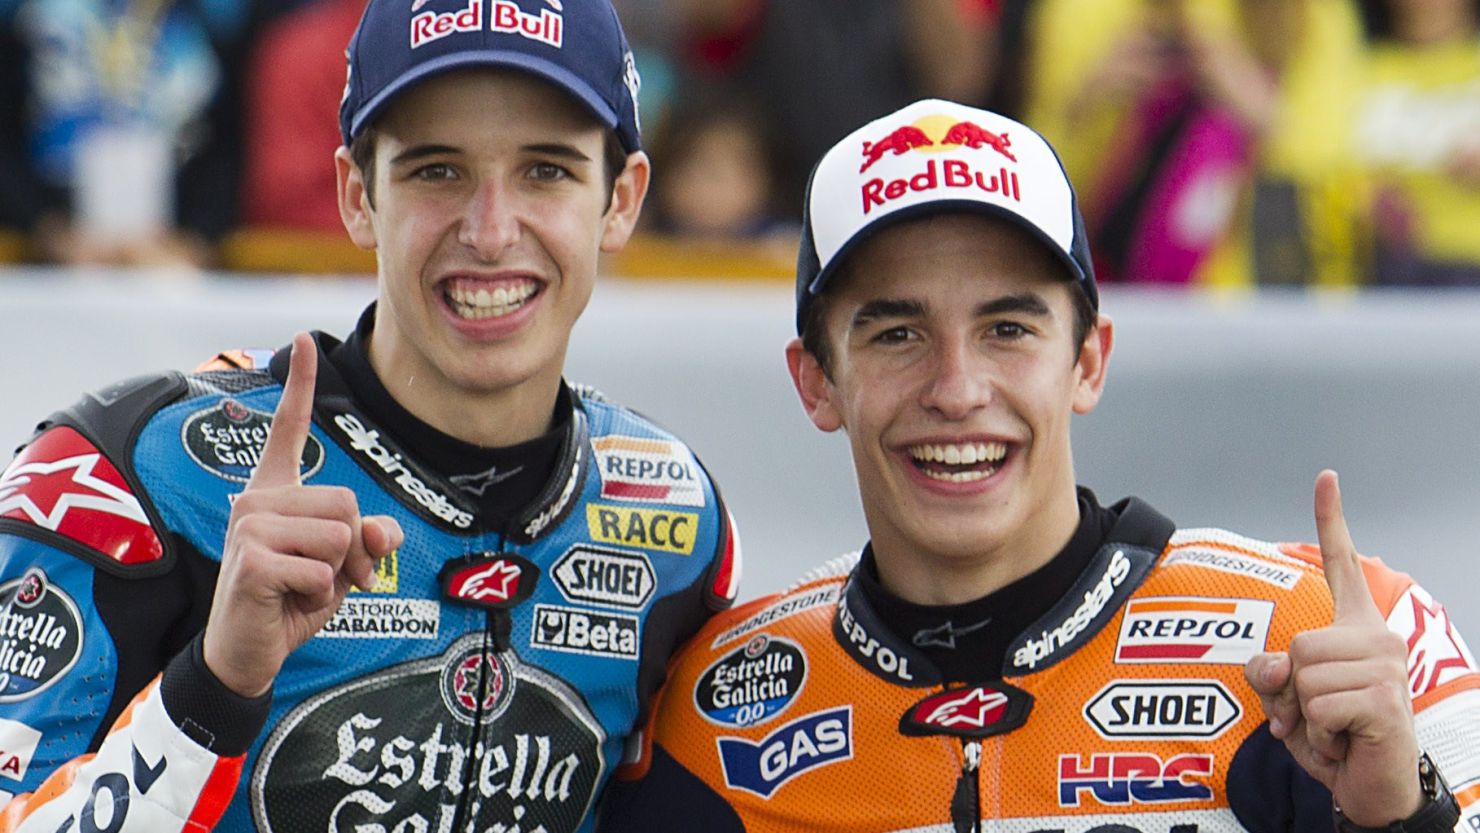 Alex and Marc Marquez (right) celebrate their double triumph in the final round of the MotoGP season in Valencia.